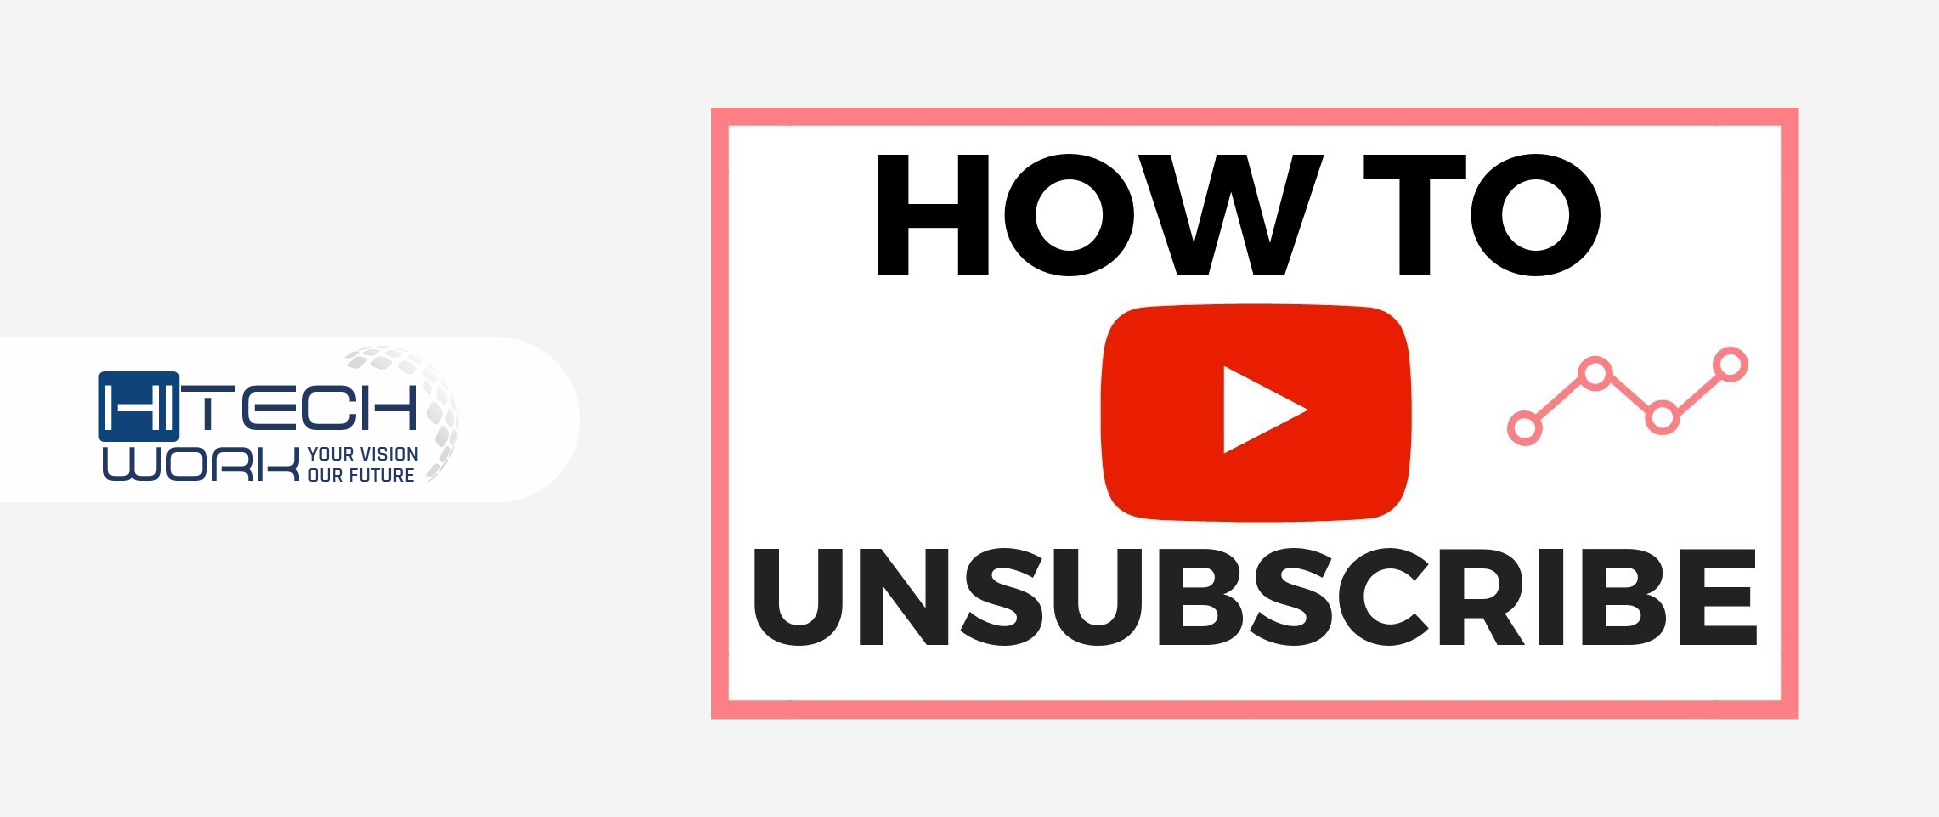 how to unsubscribe from YouTube channel